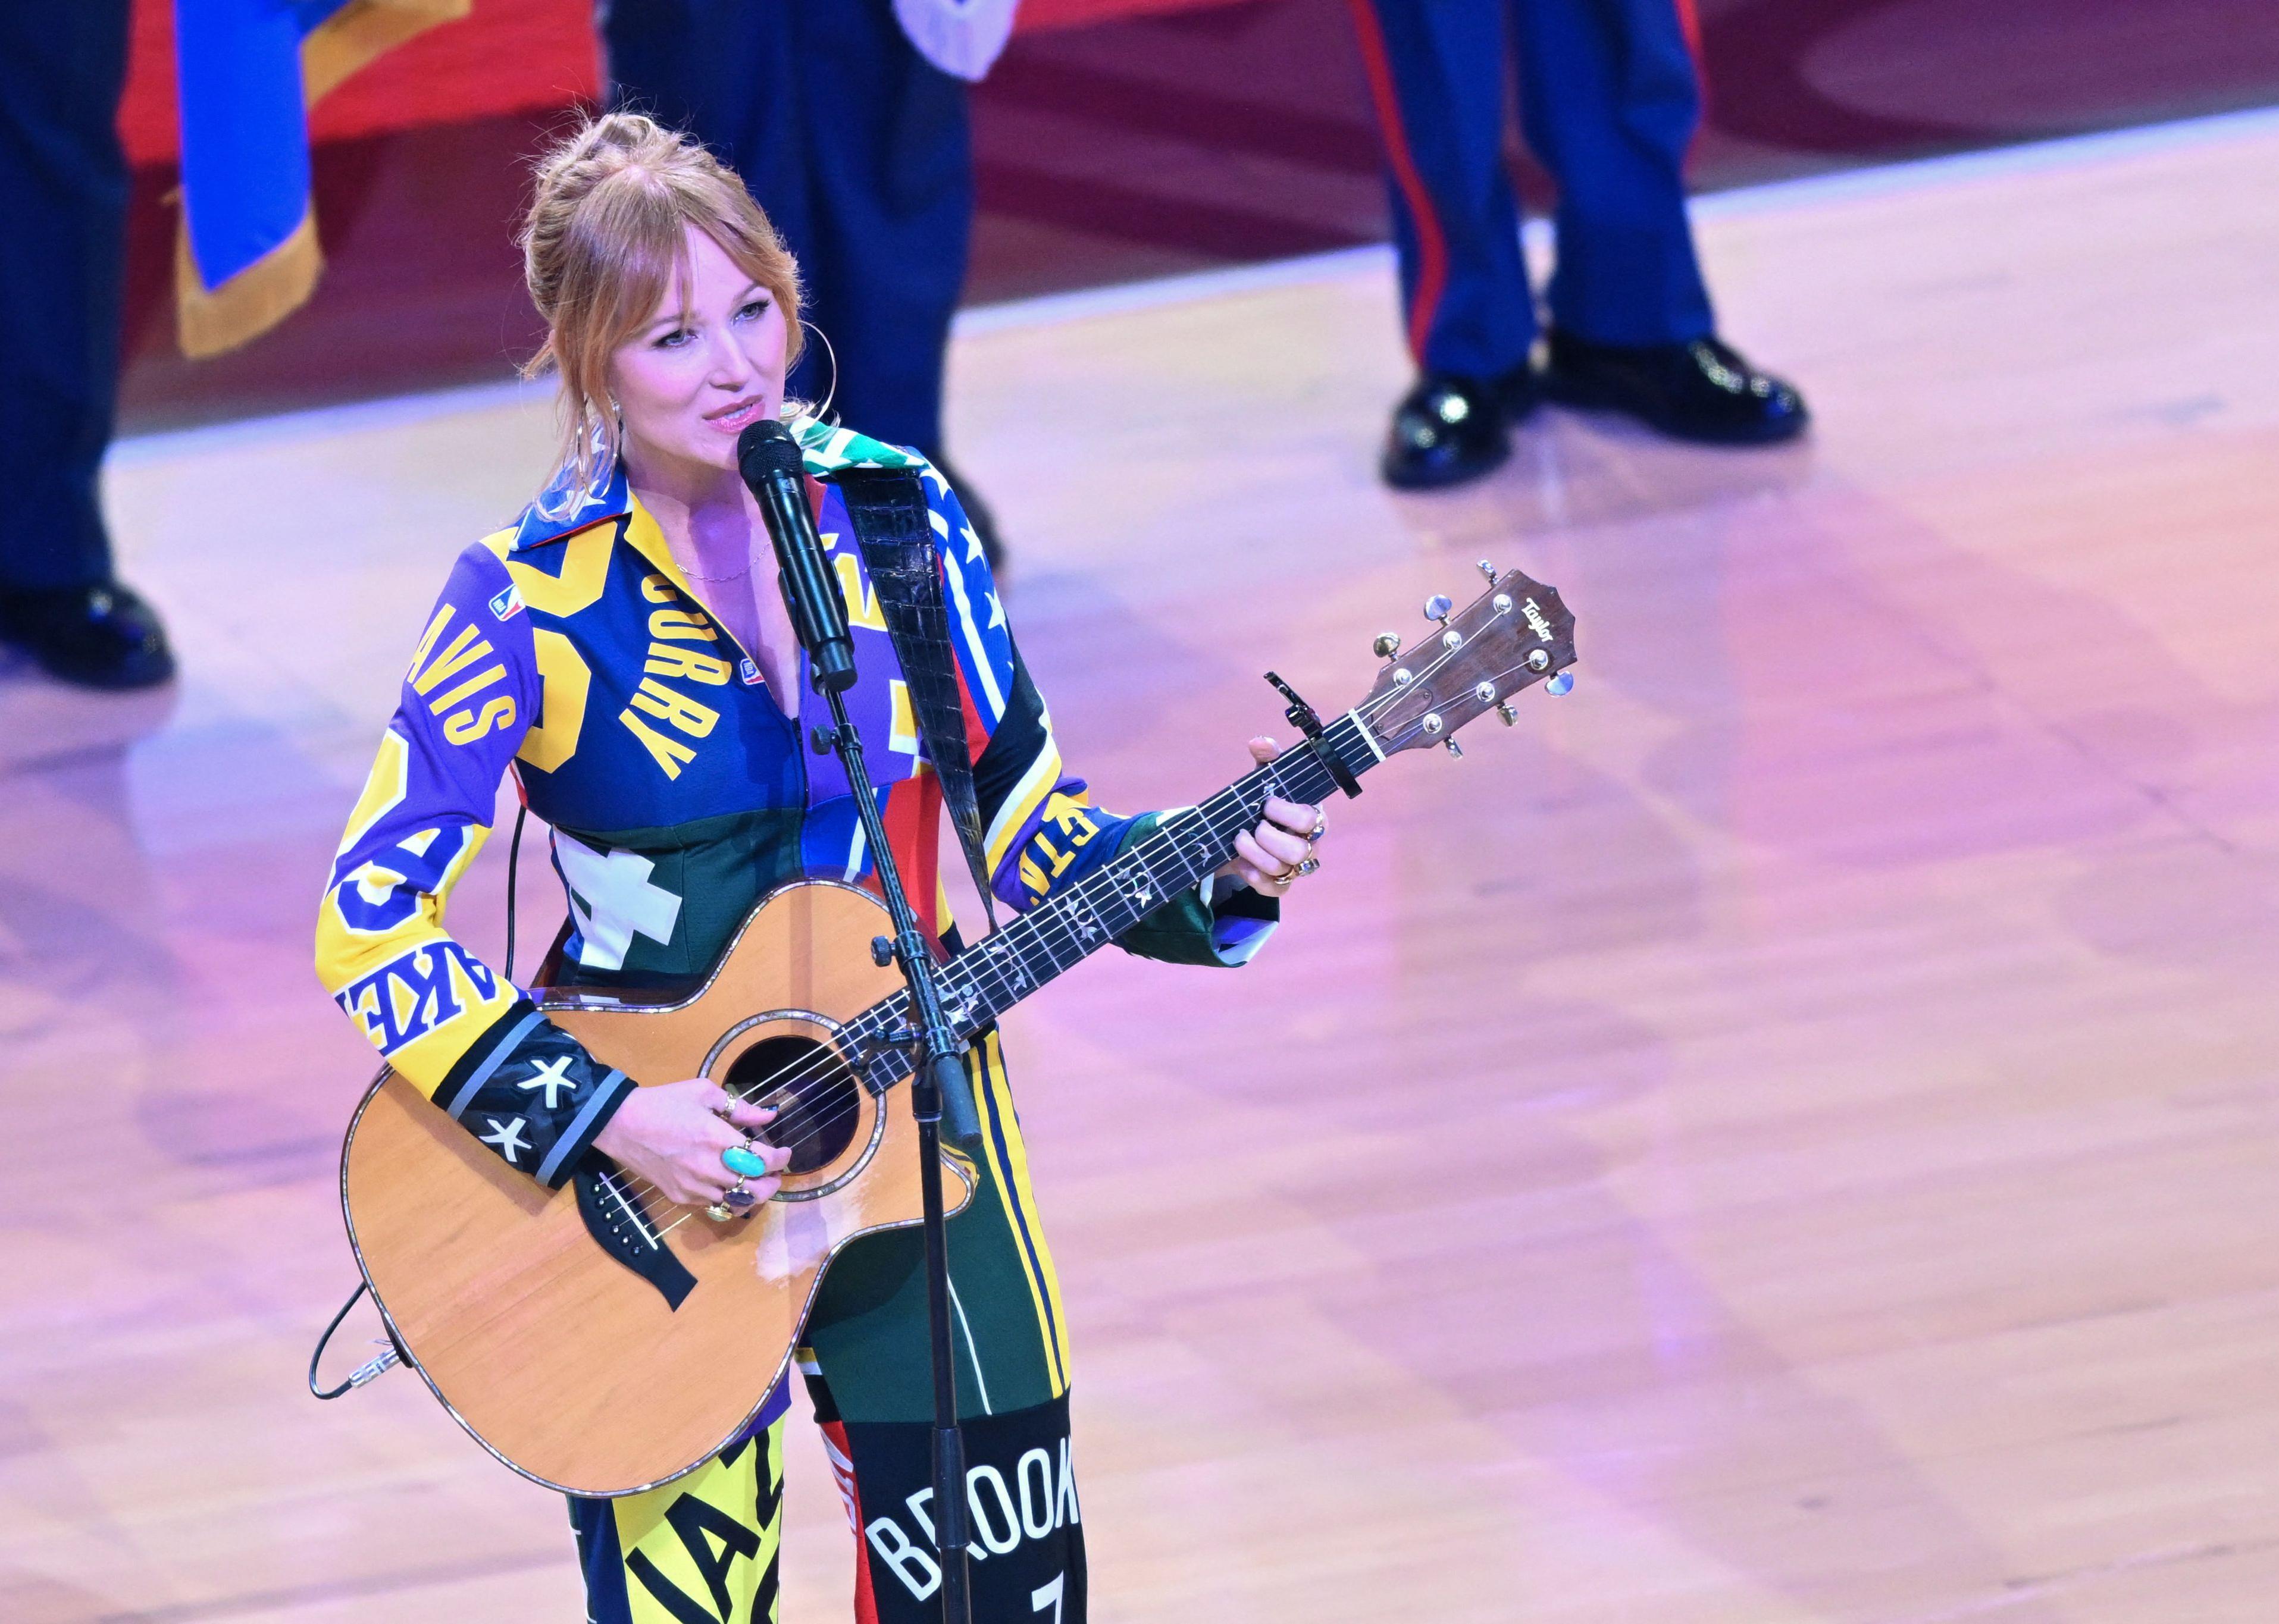 Jewel performs the National Anthem ahead of the NBA All-Star game.